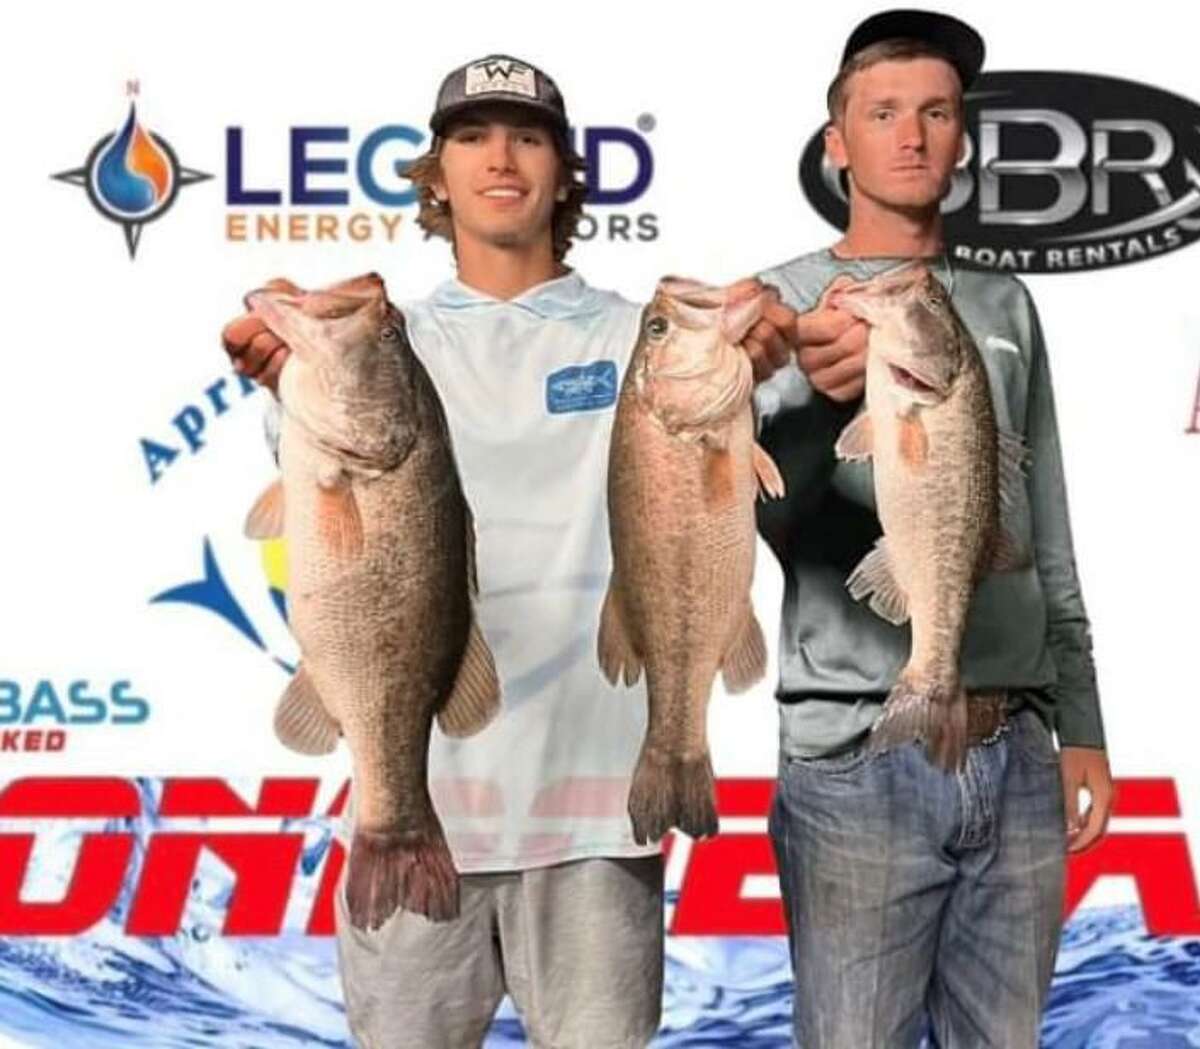 Cade Lipham and Blake Tesch came in third place in the CONROEBASS Tuesday Tournament with a stringer weight of 12.88 pounds.